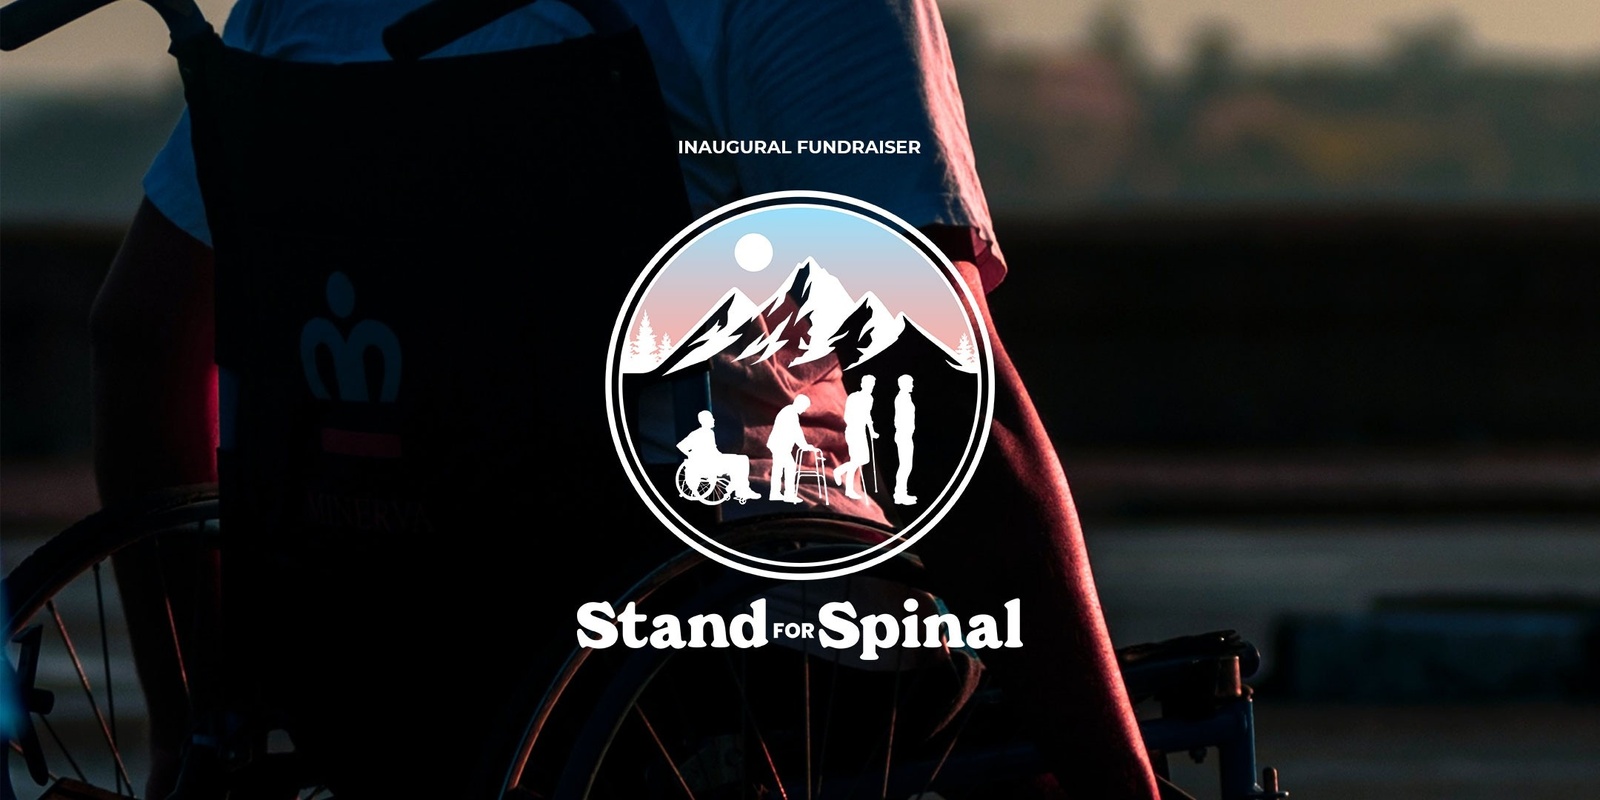 Banner image for Stand for Spinal: Inaugural Fundraiser